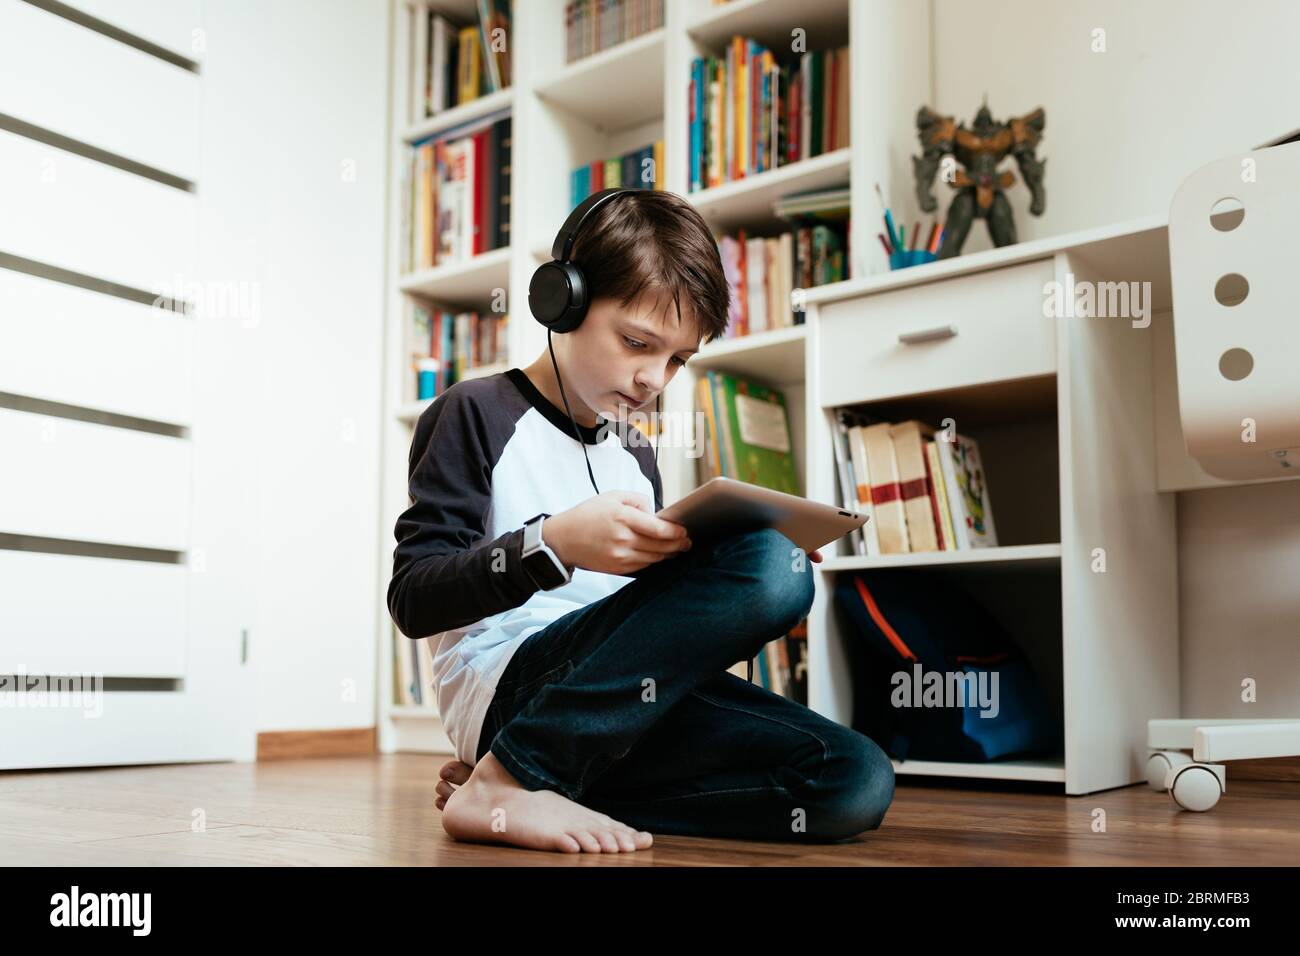 Kneeling boy learning on digital tablet at home. Young student doing his homework on his own. Stock Photo